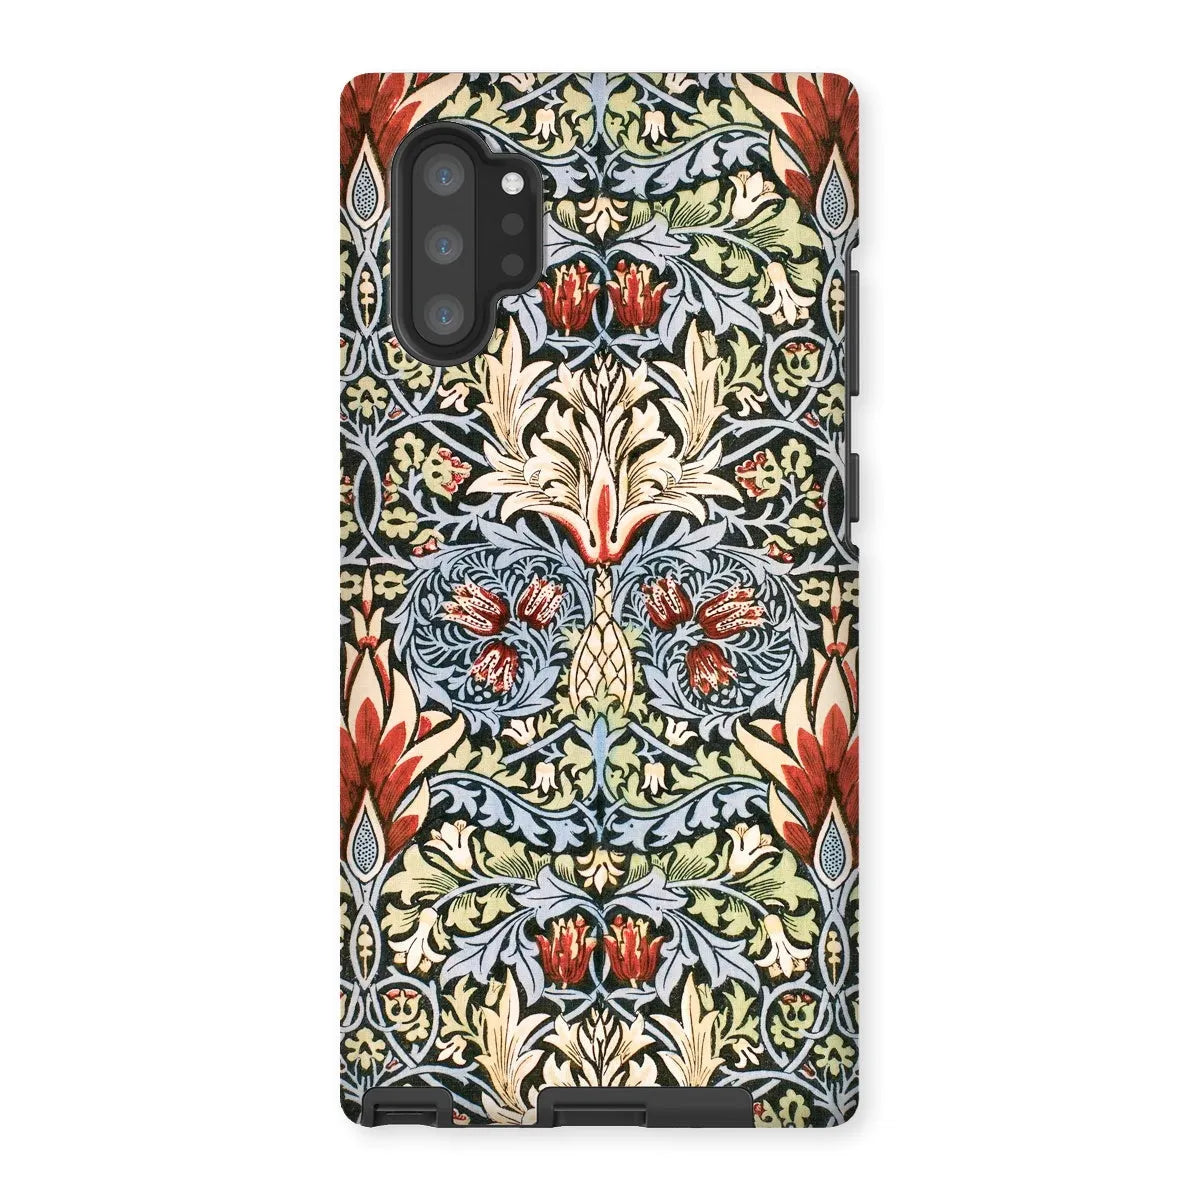 Snakeshead - Arts And Crafts Pattern Phone Case - William Morris - Samsung Galaxy Note 10p / Matte - Mobile Phone Cases